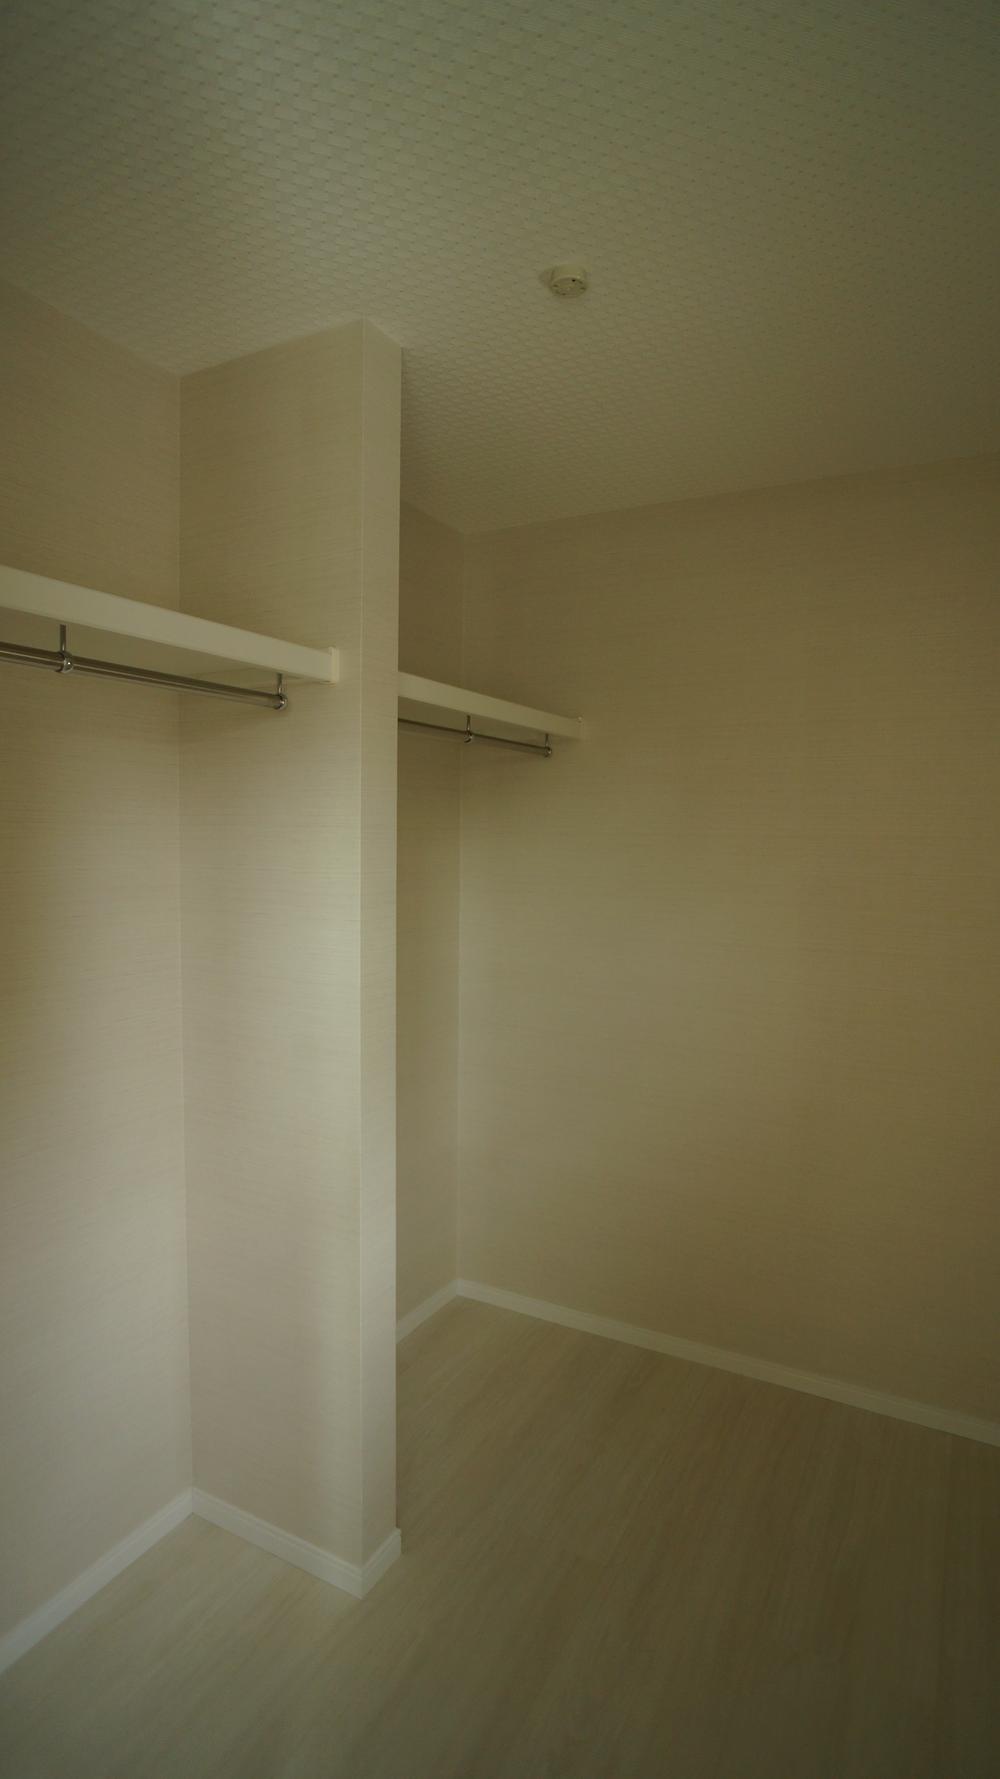 Other. Same construction company construction example: walk-in closet